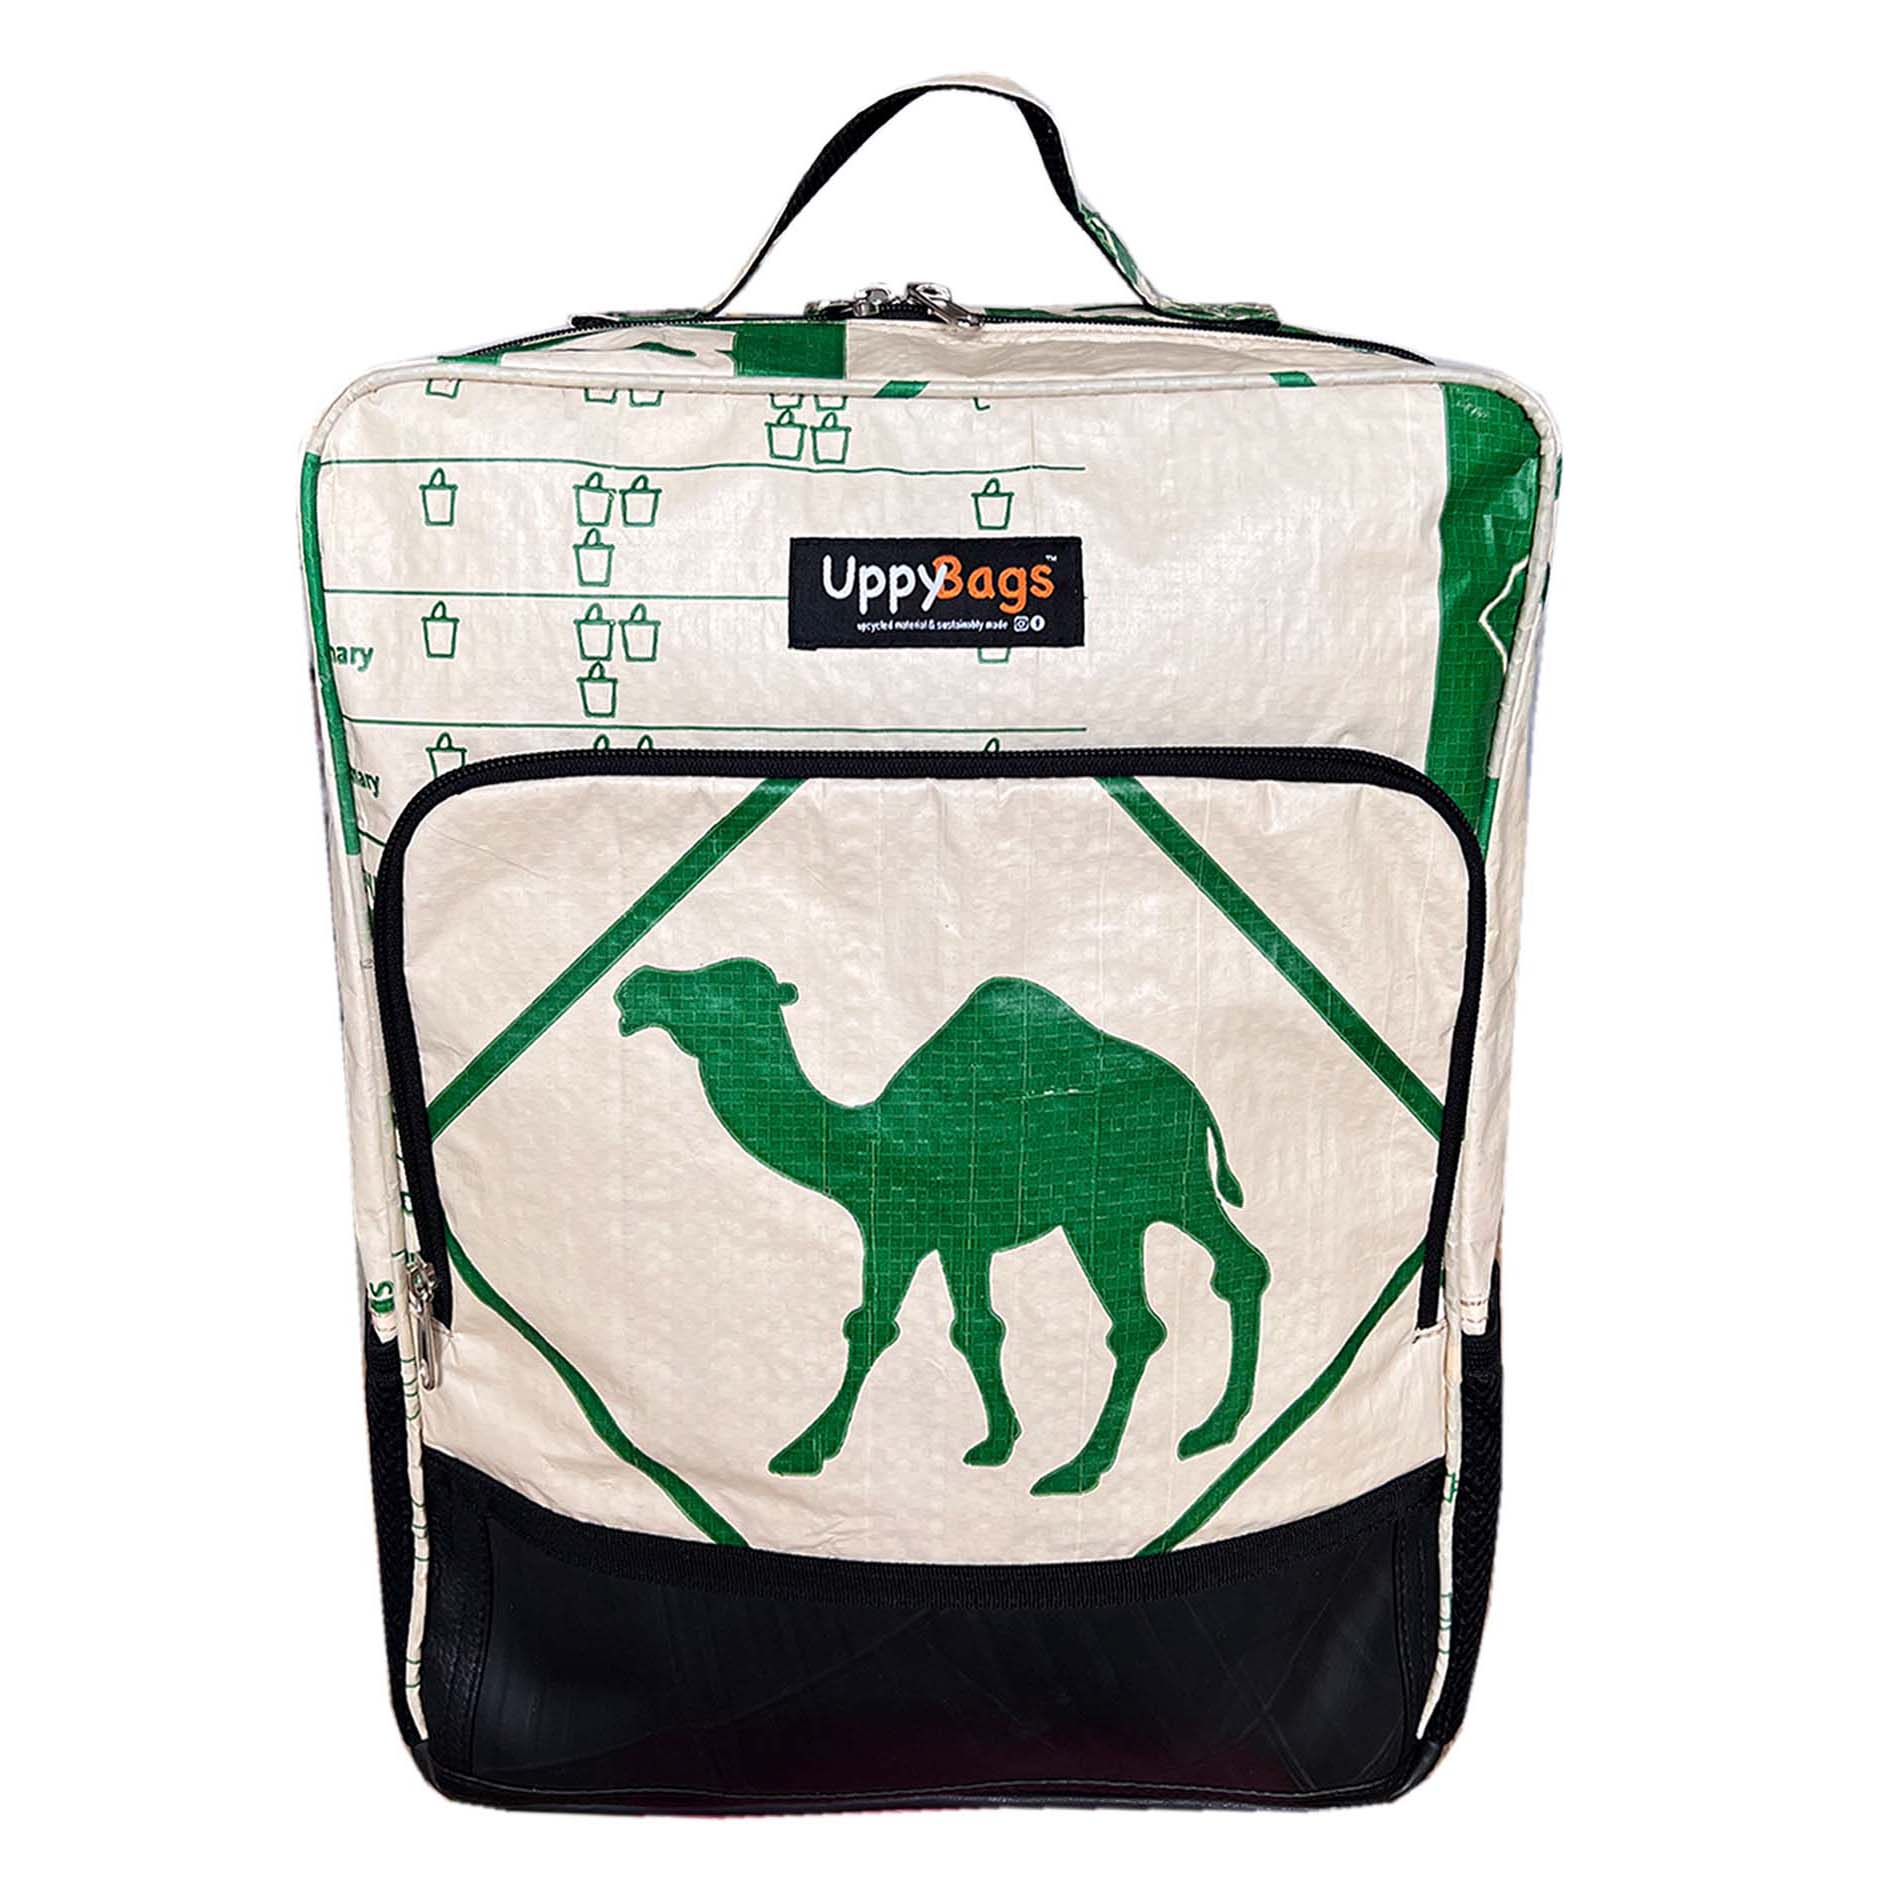 Recycled backpack UK, ethical bags UK, recycled material backpack with animal print. Laptop backpack, work backpack made of recycled material with elephant and green camel print UppyBags  